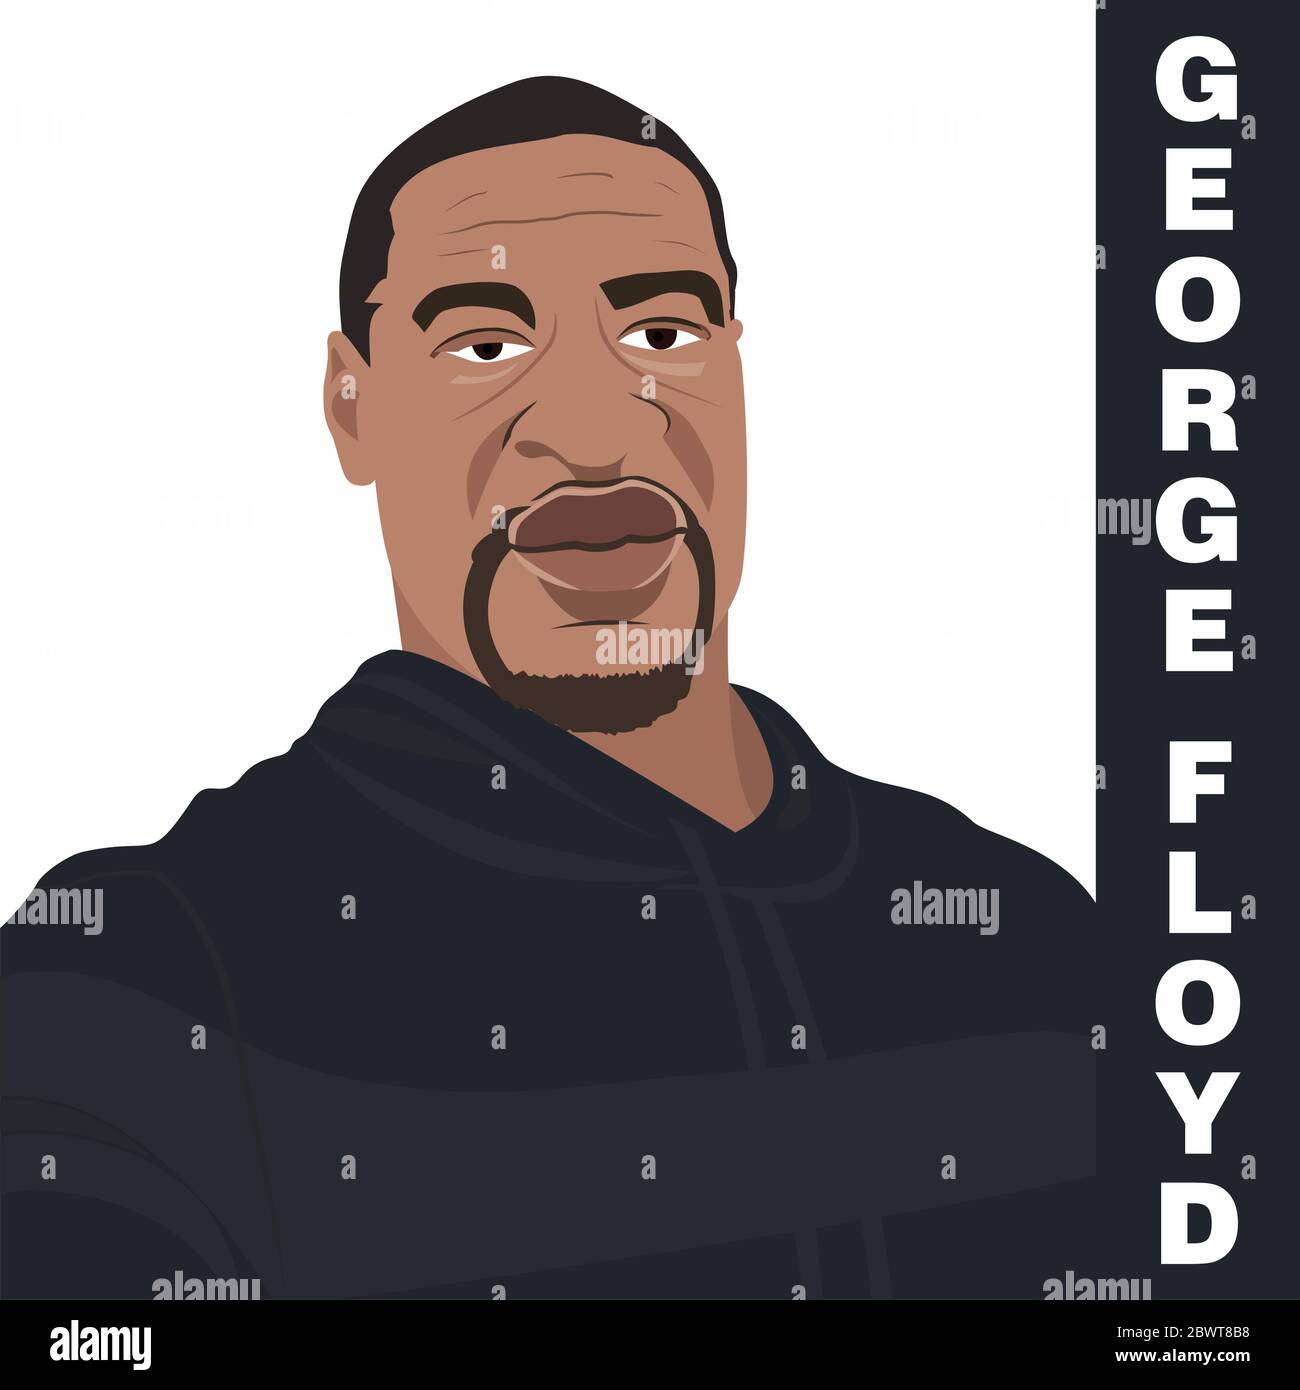 May 25, 2020: Vector illustration of George Floyd in flat style art on an isolated white background Stock Vector